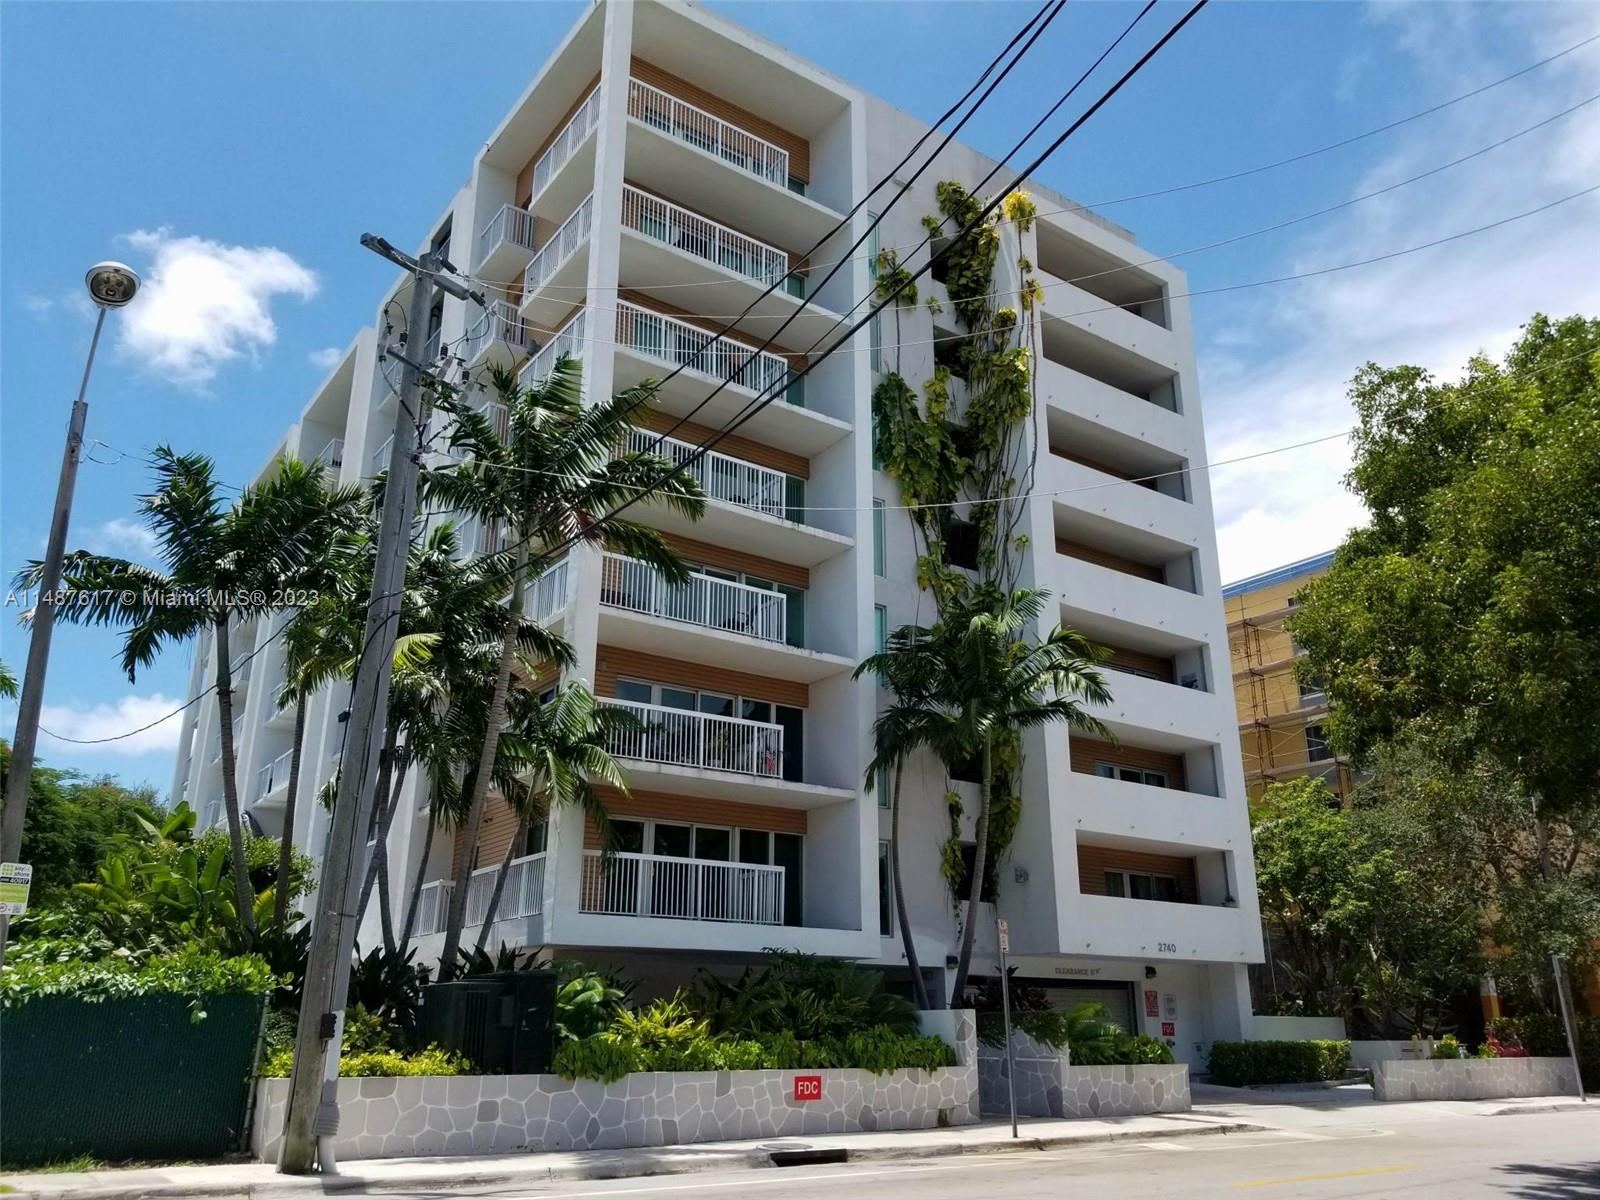 Rarely available 5th floor corner unit at Villaggio in the Grove! Located convenient to US1, Coconut Grove Metro/Grove Central, Berries in the Grove & more! This well-maintained 1/1 features a generous kitchen w/complete appliance set, granite counter tops & eat-in bar. Kitchen is open to a light & bright living area which leads to a large balcony looking into the Grove. Enjoy incredible sunrise views from this private outdoor living space. This 5th floor corner unit, in building's quietest line, shares no party walls w/neighbors. Rarely used convenient interior staircase nearby. Villaggio in the Grove also offers community amenities including gym, rooftop pool w/lounging areas, gated entry, intercom entry + gated & assigned parking. Unit rented at $2400/mth. Tenant is month-to-month.